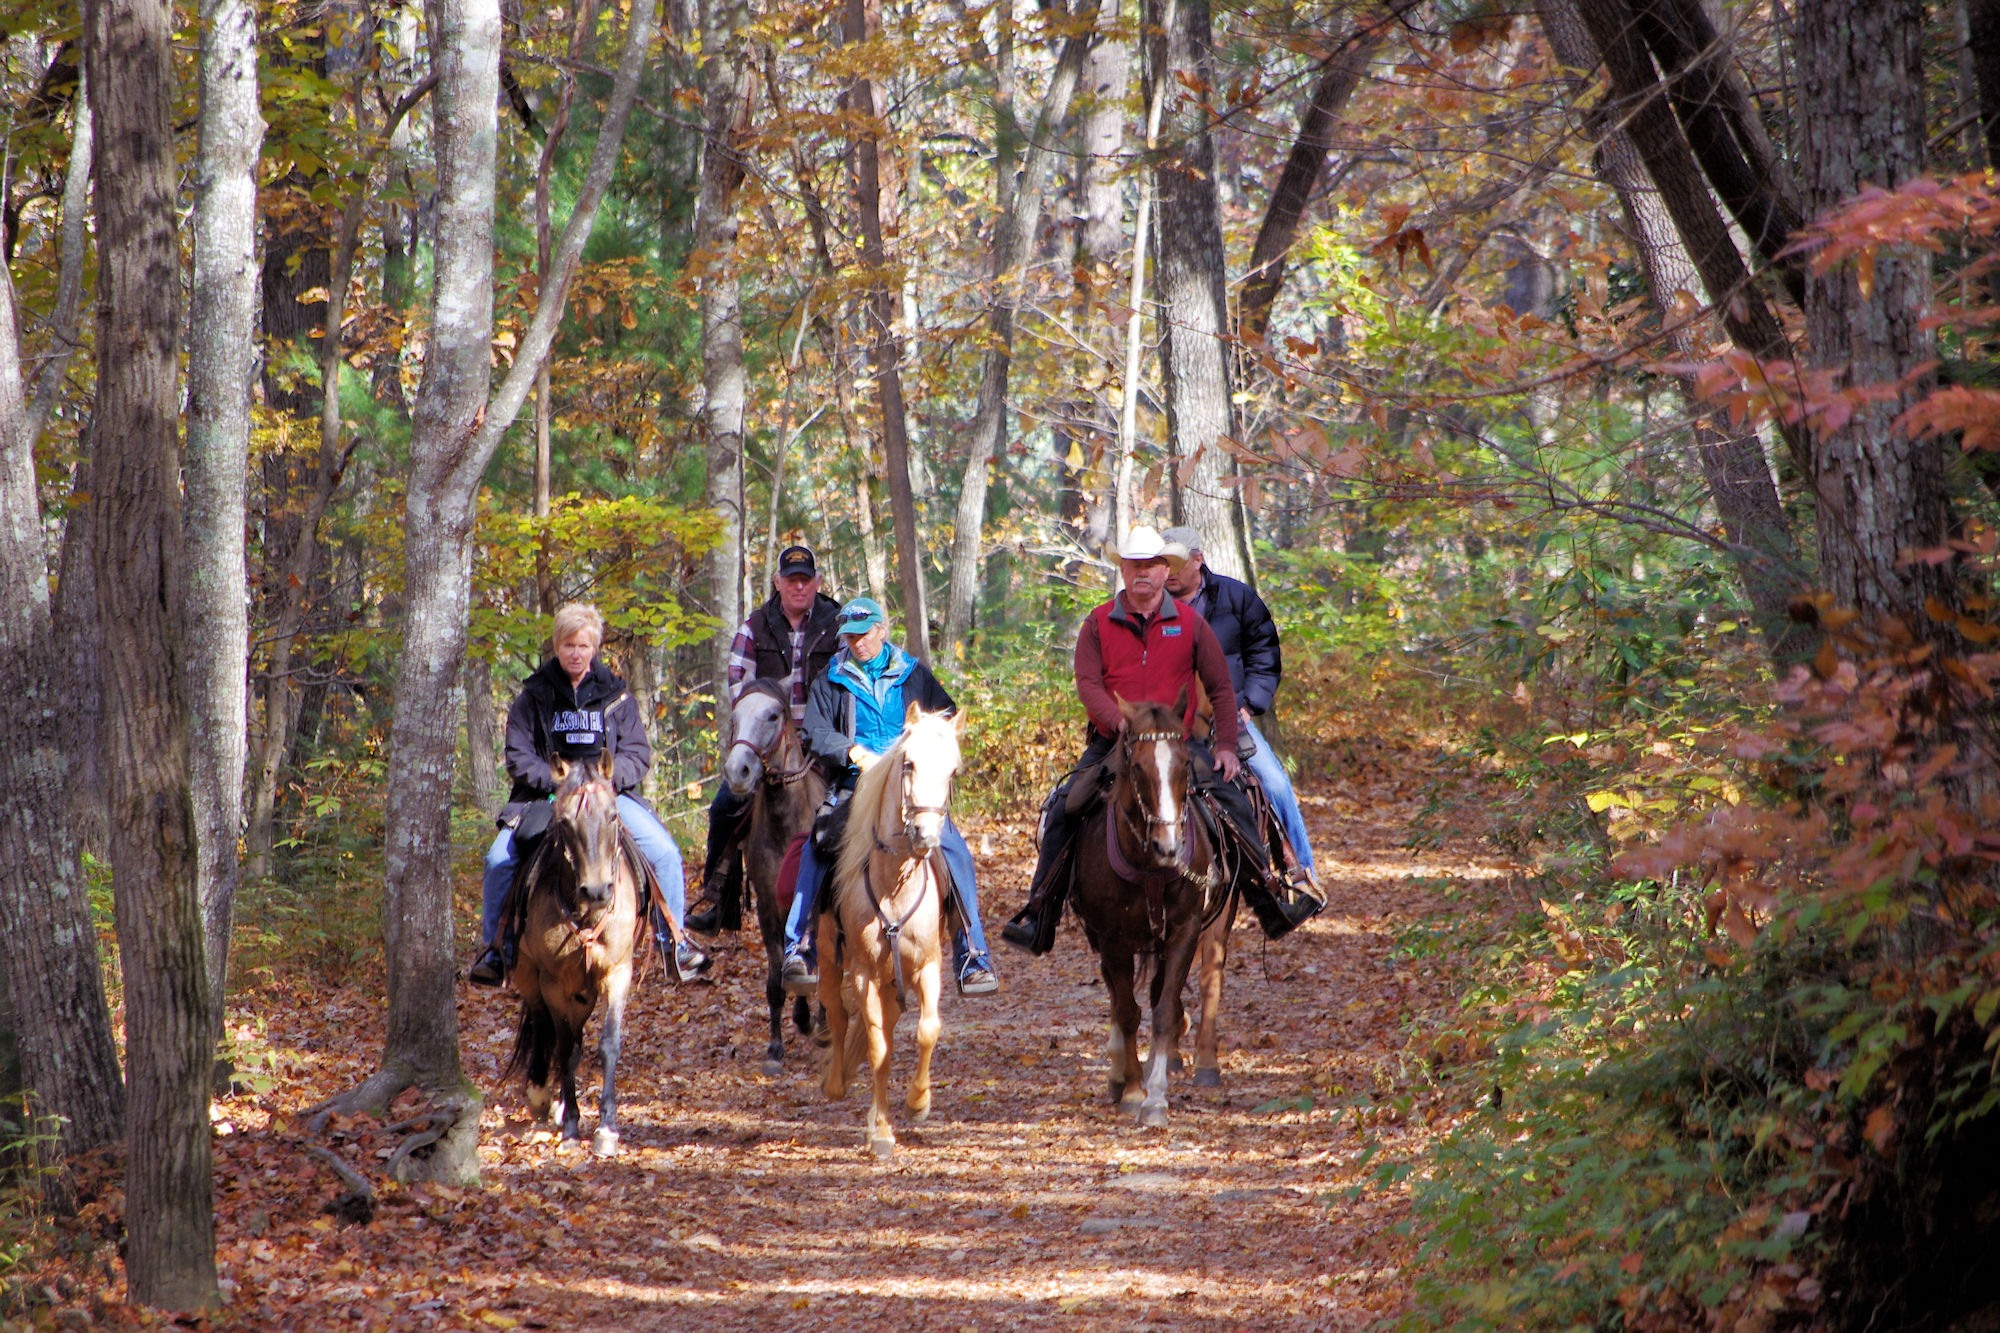 Horse riding on DuPont Forest trails. Photo by Mark File, RomanticAsheville.com.